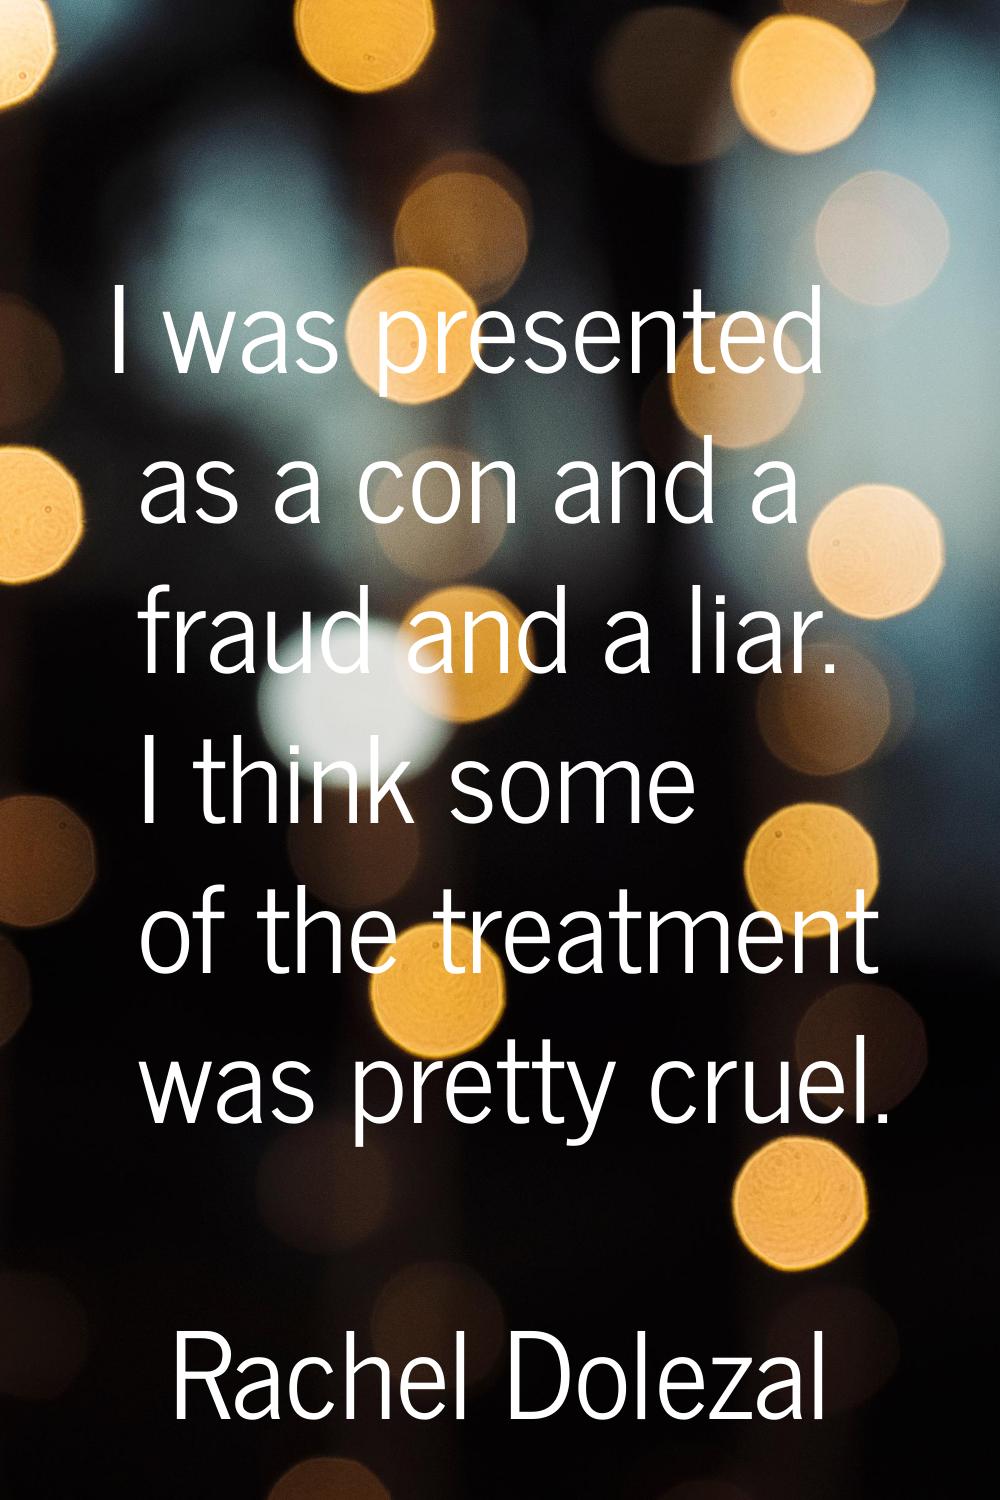 I was presented as a con and a fraud and a liar. I think some of the treatment was pretty cruel.